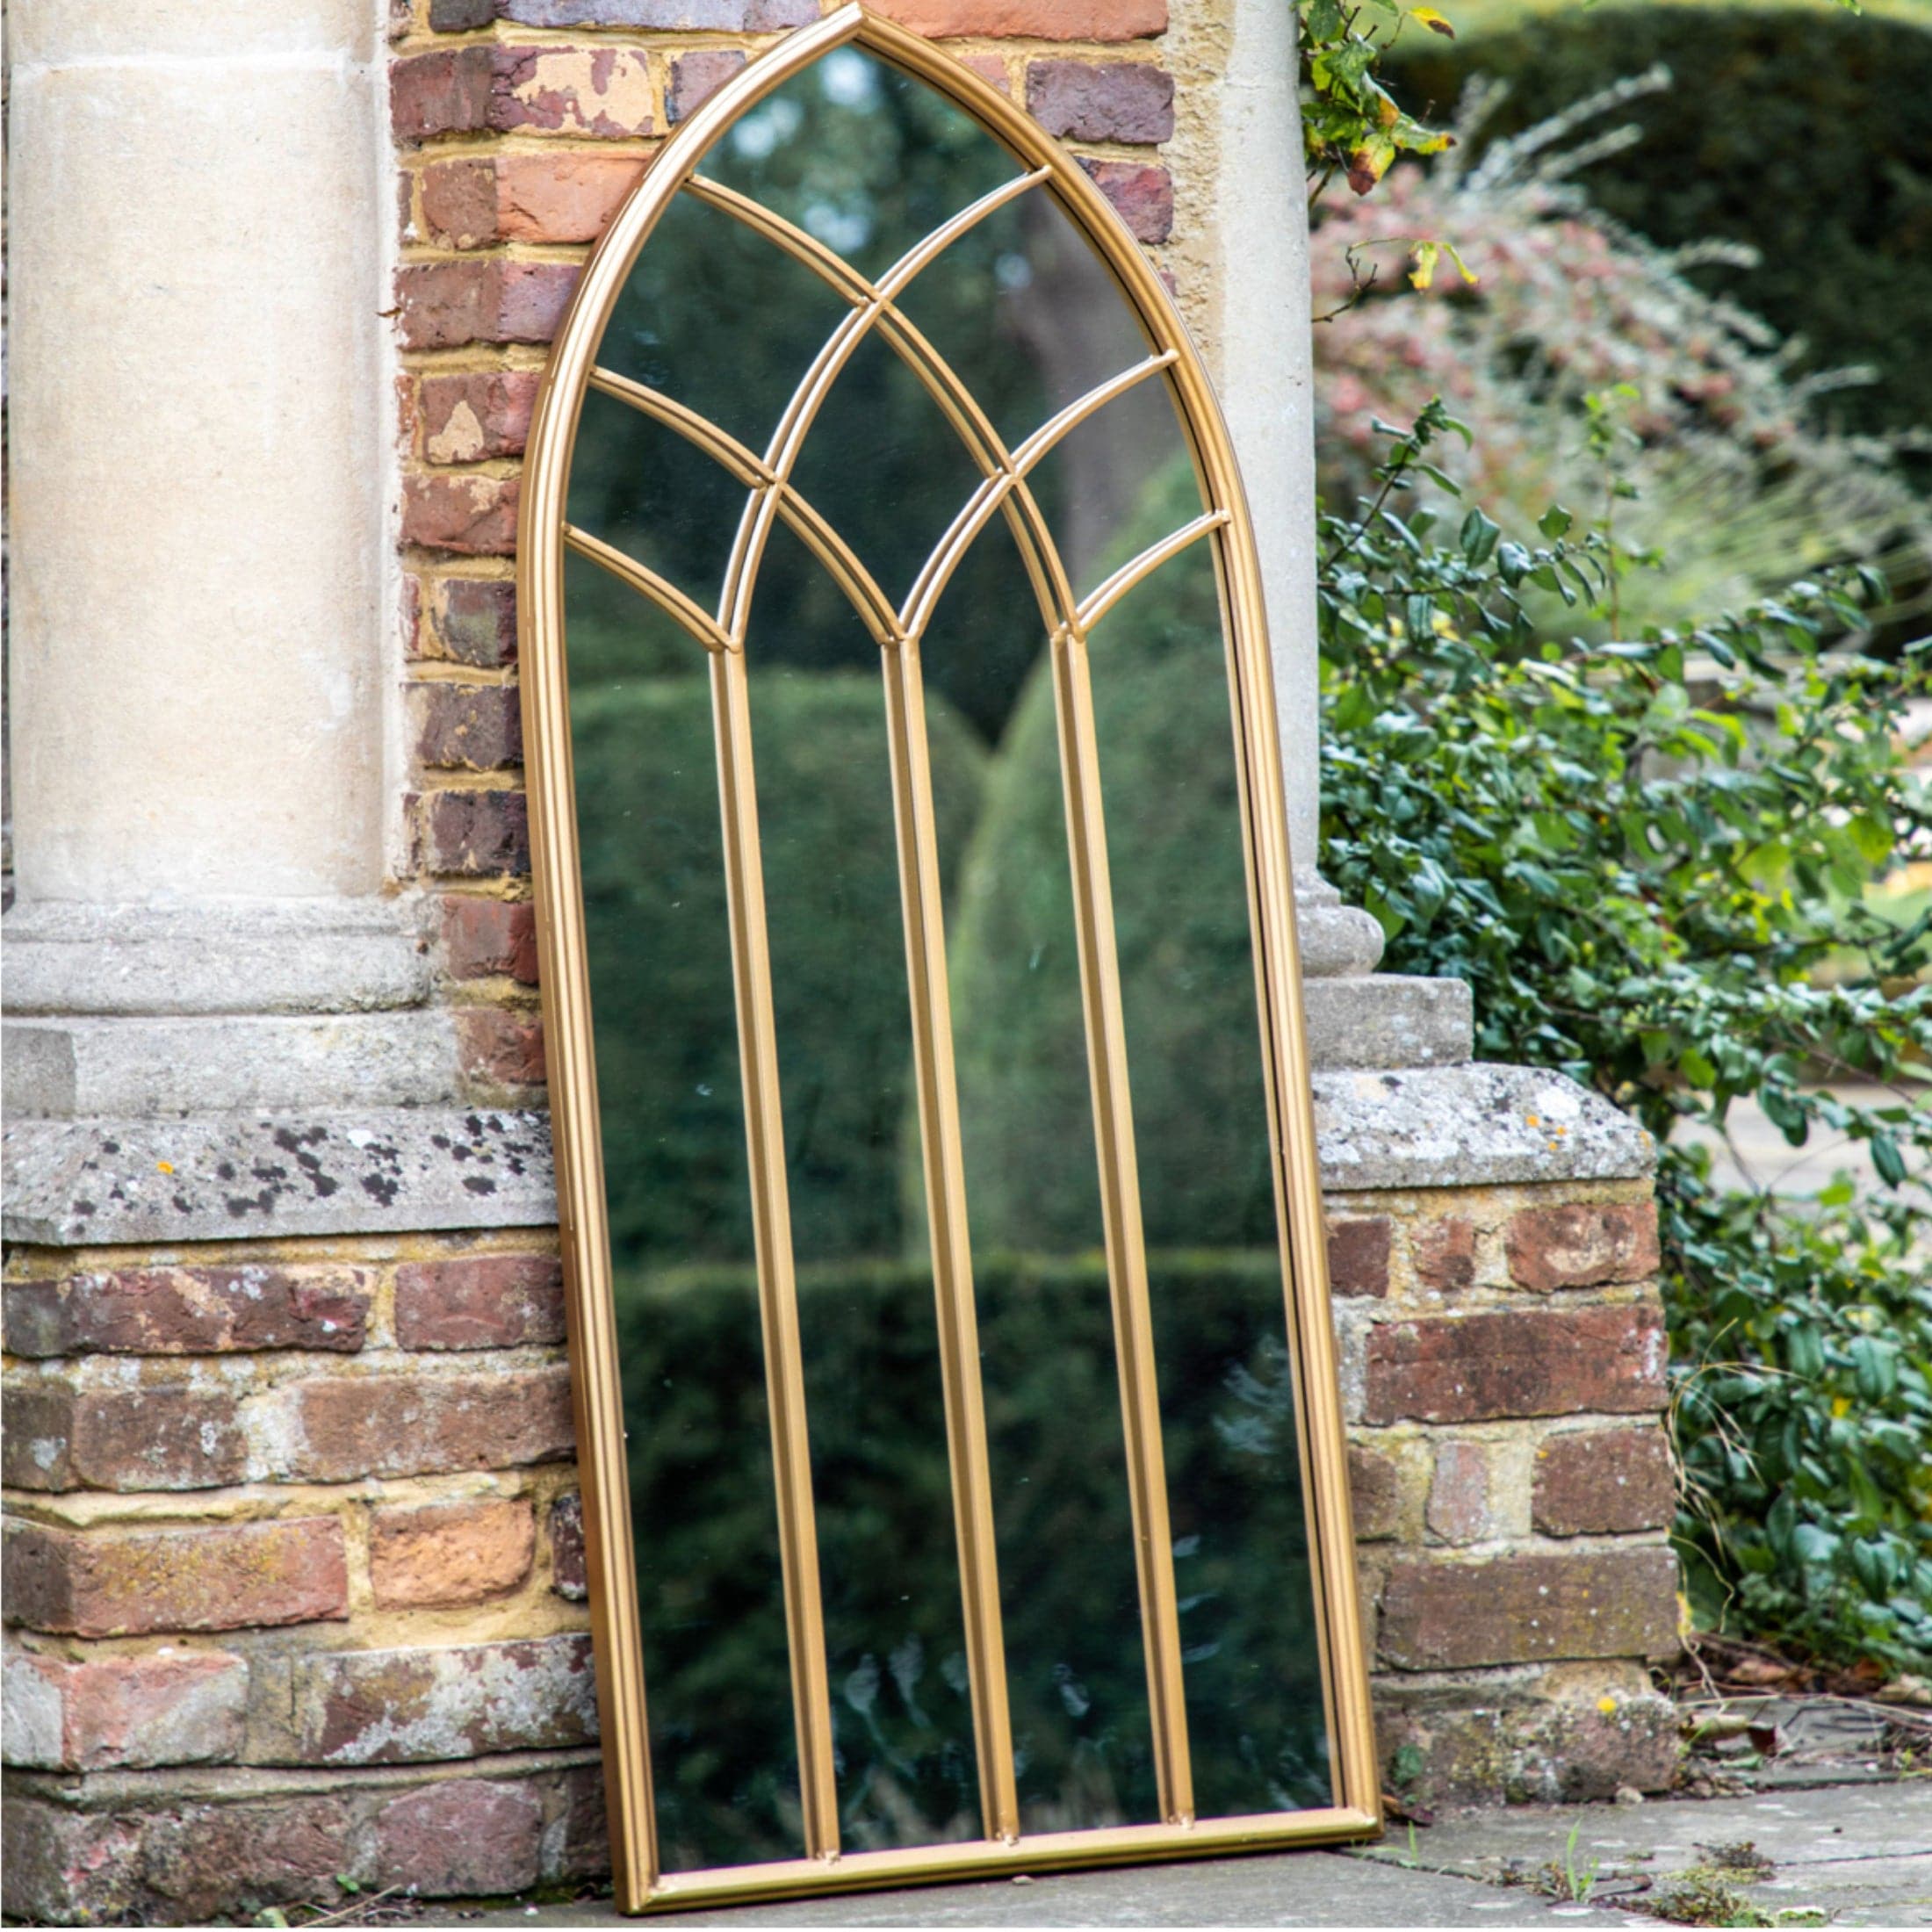 Tall Gold Arched Outdoor Garden Wall Mirror 4